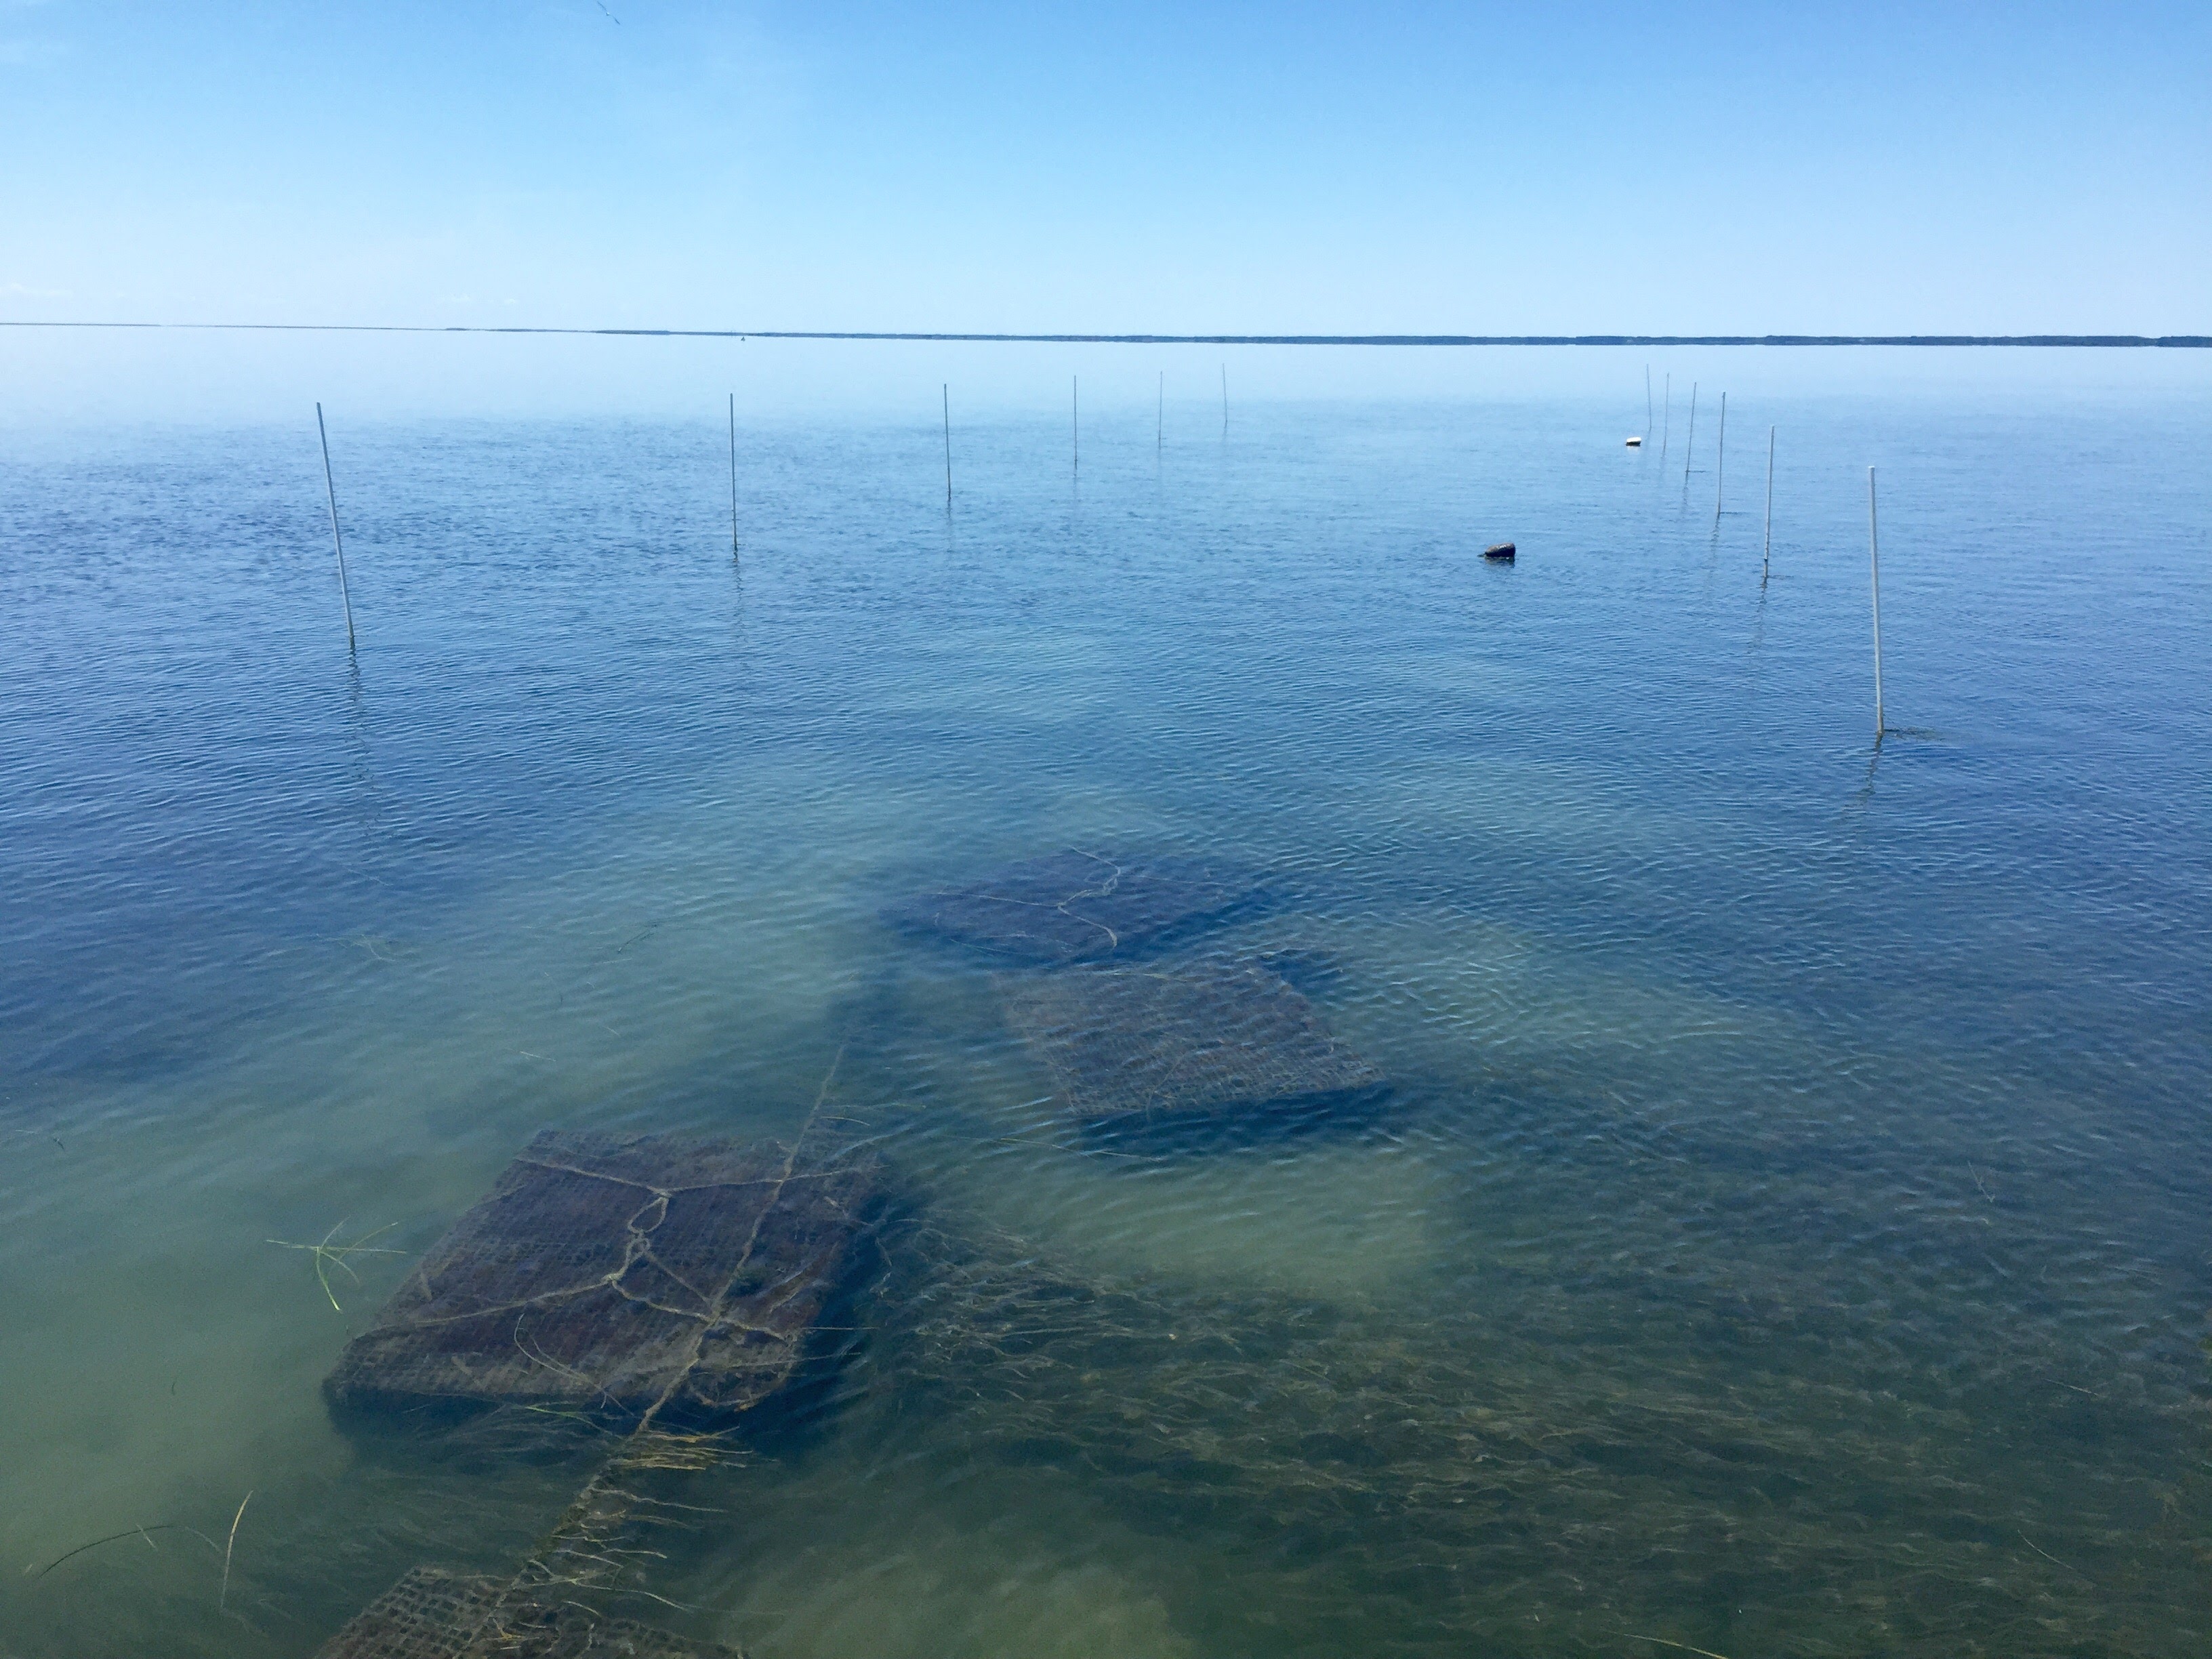 ESL’s bay scallop grow-out site